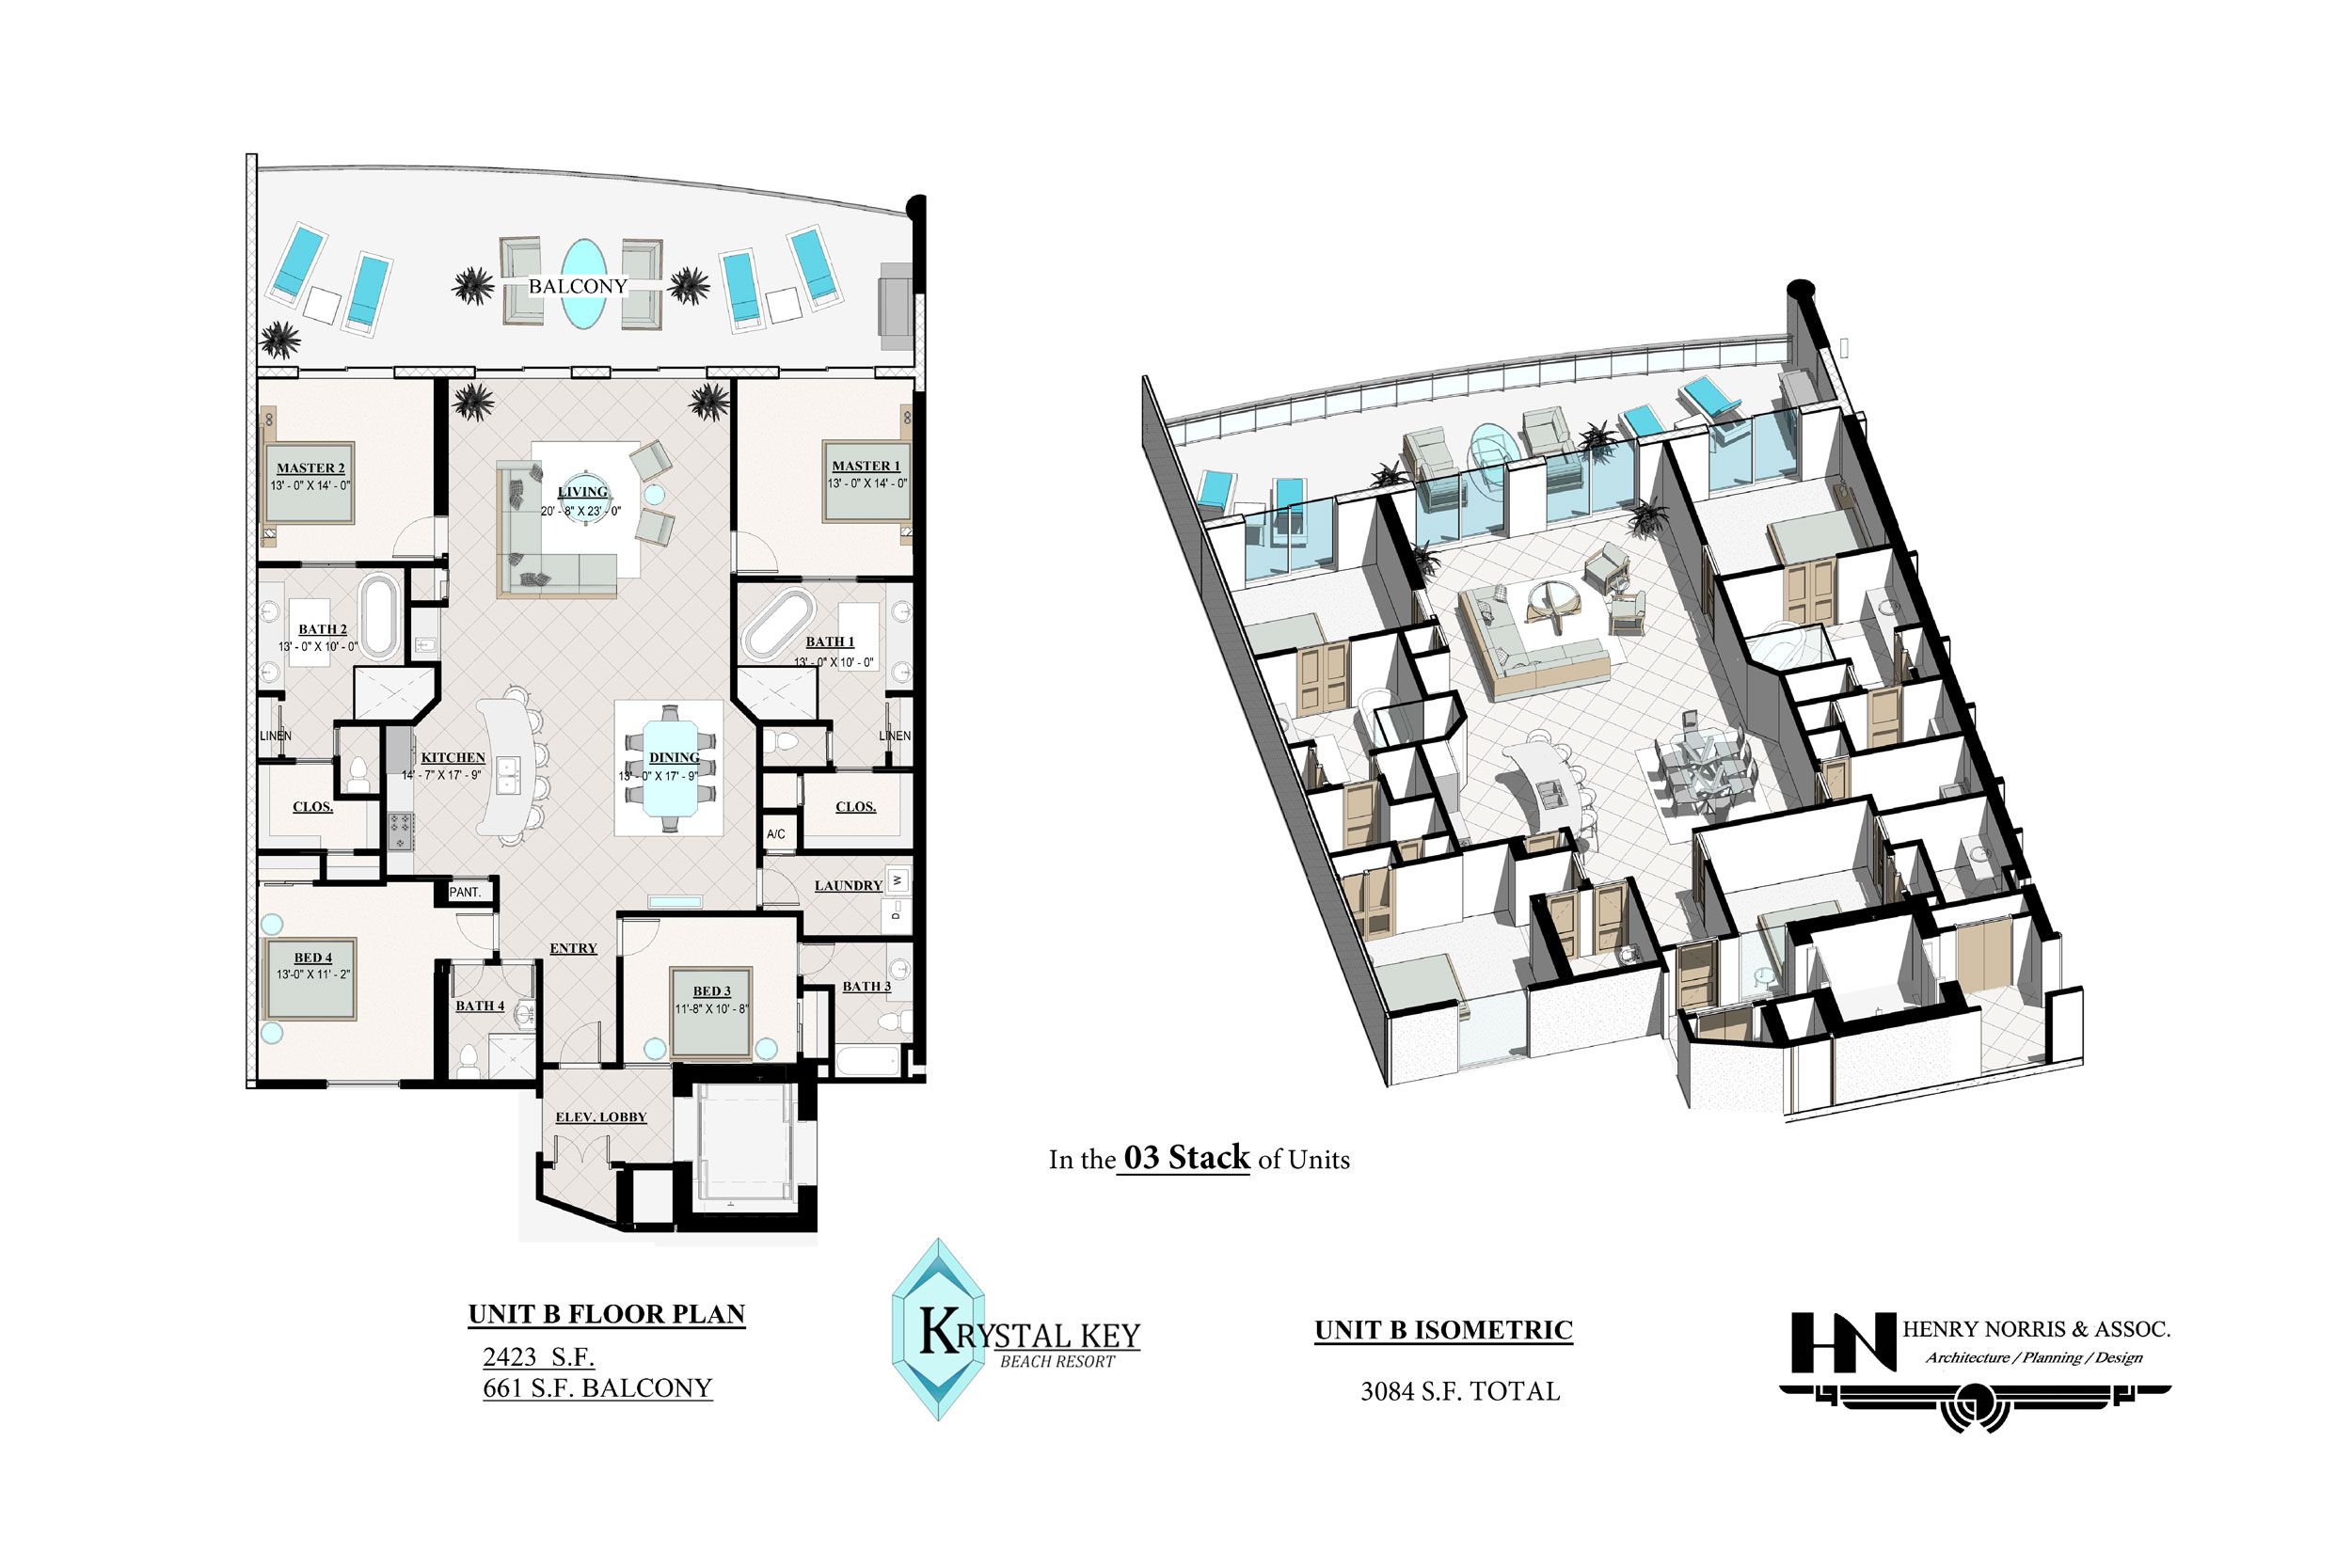 Unit B Floor Plan in the 03 Stack